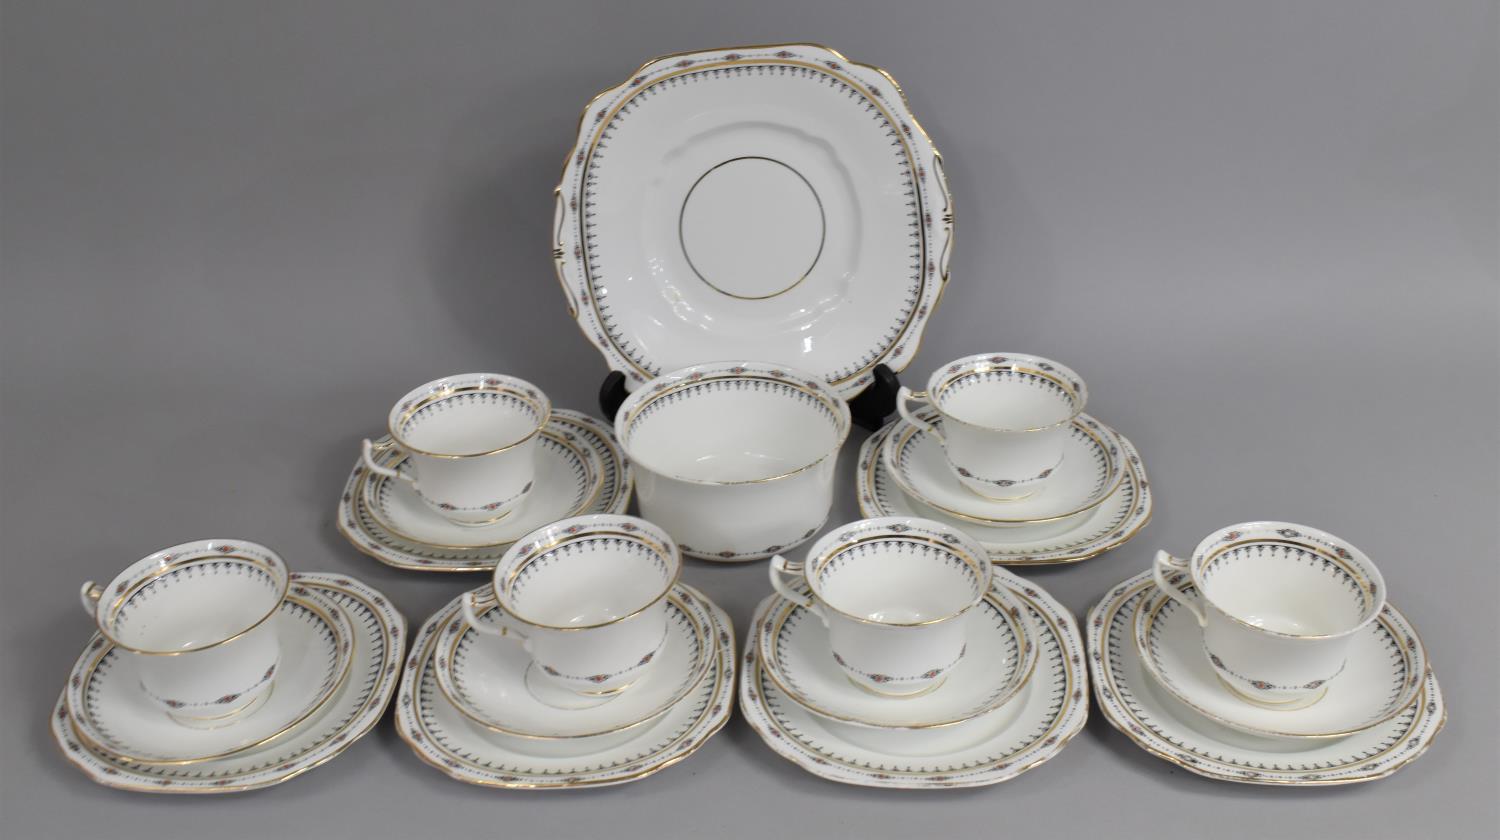 An Early/ Mid 20th Century Tea Service Having Gilt and Black Scrolled Trim Comprising Six Cups, Slop